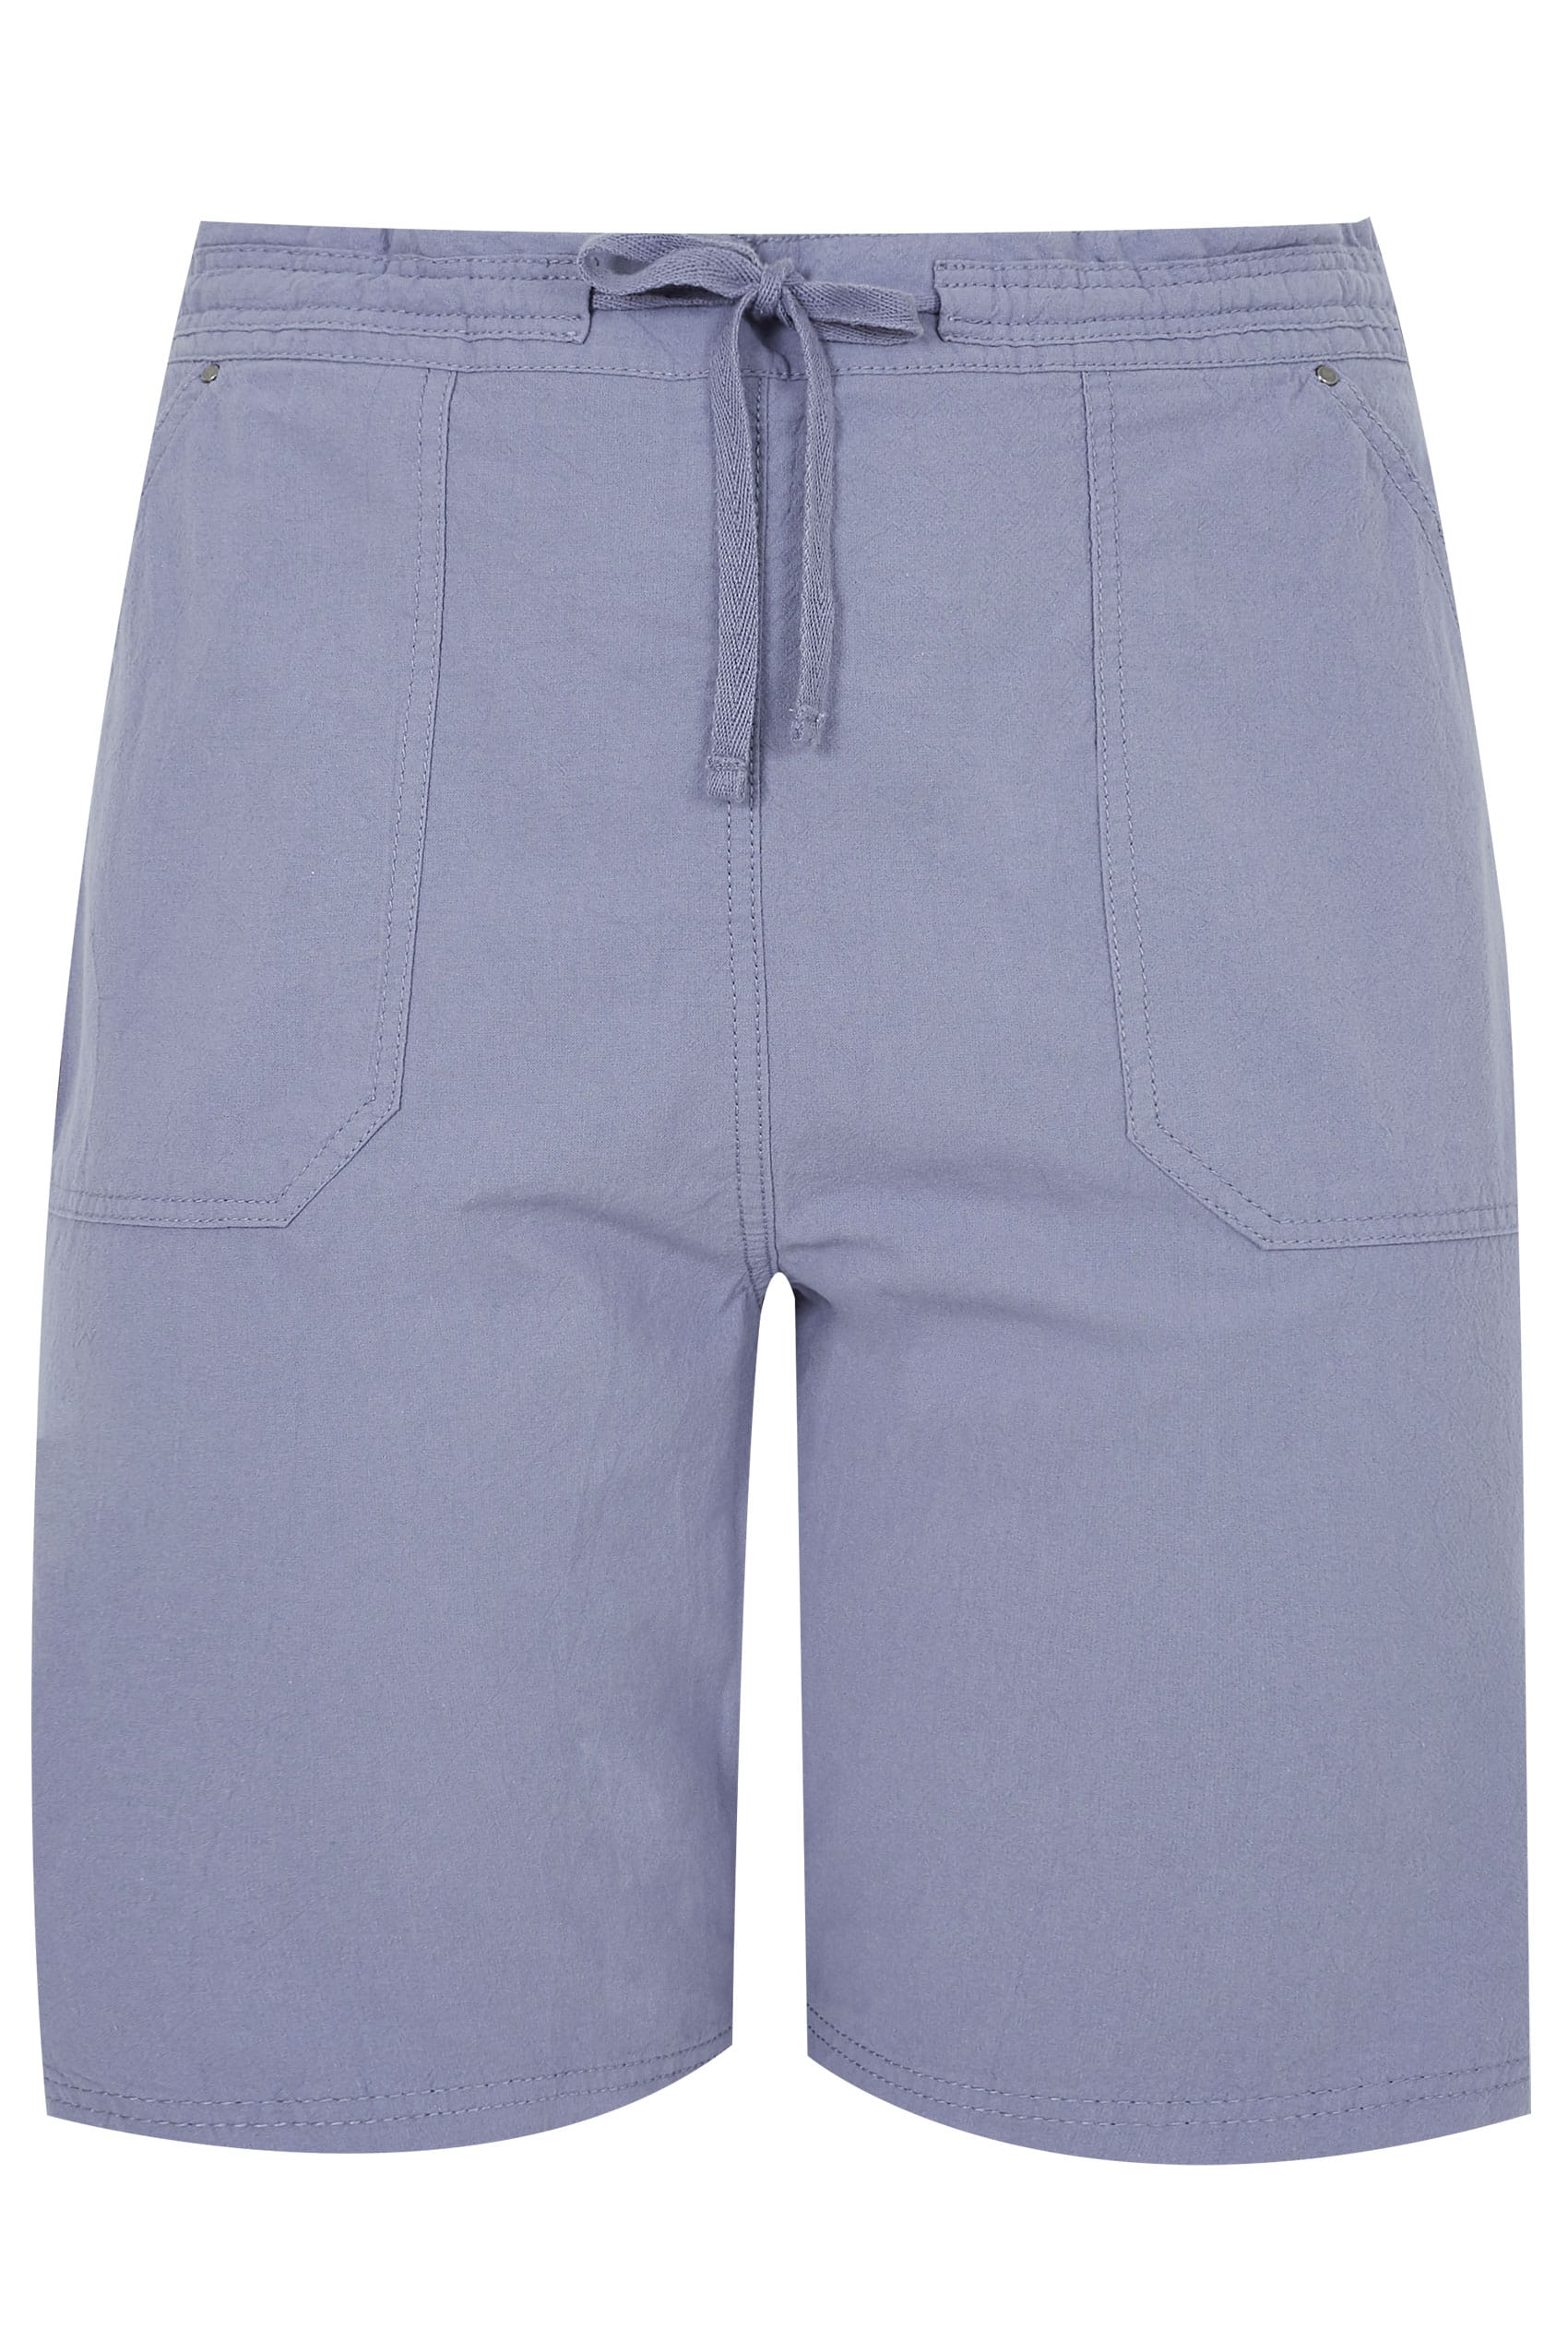 Light Blue Cool Cotton Pull On Shorts, plus size 16 to 36